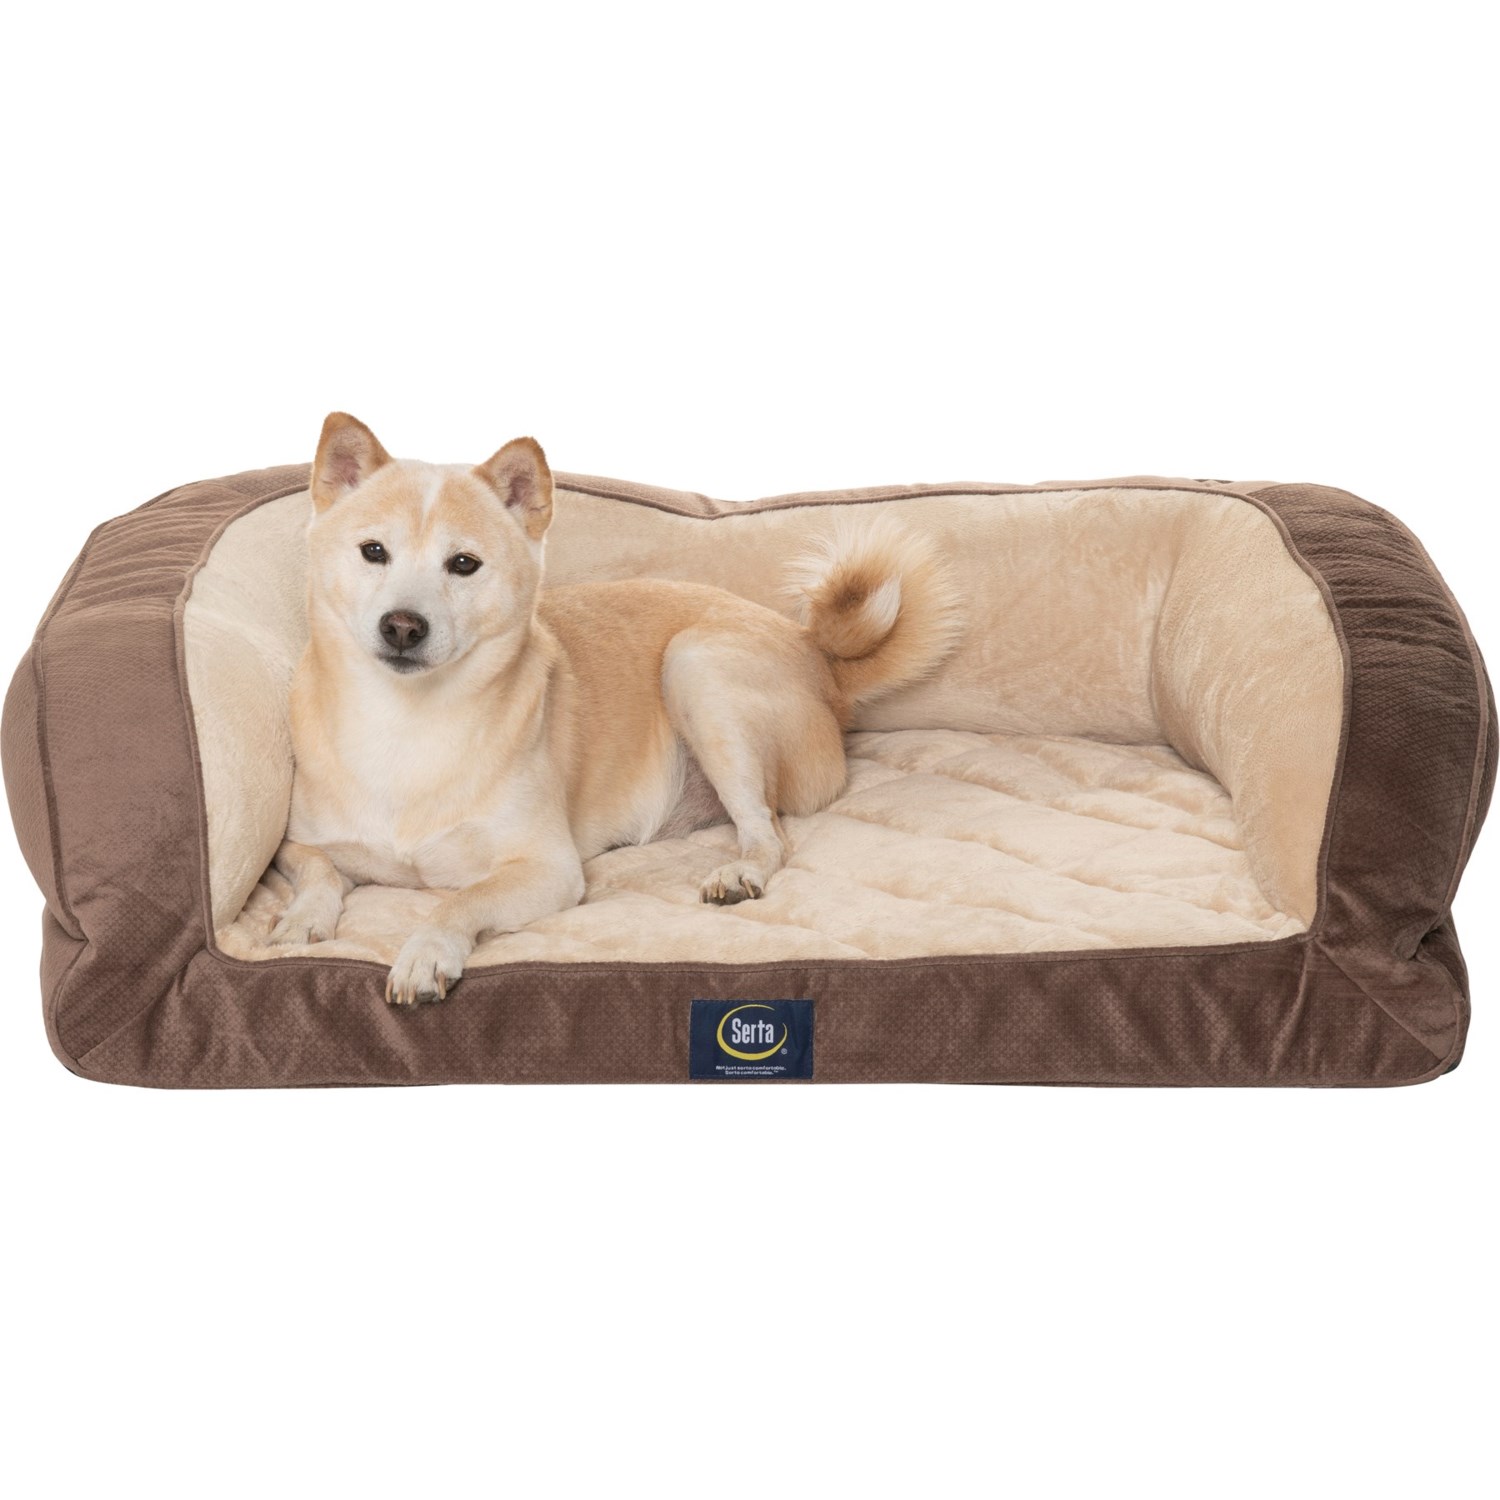 Serta Quilted Couch Dog Bed - 38x27”